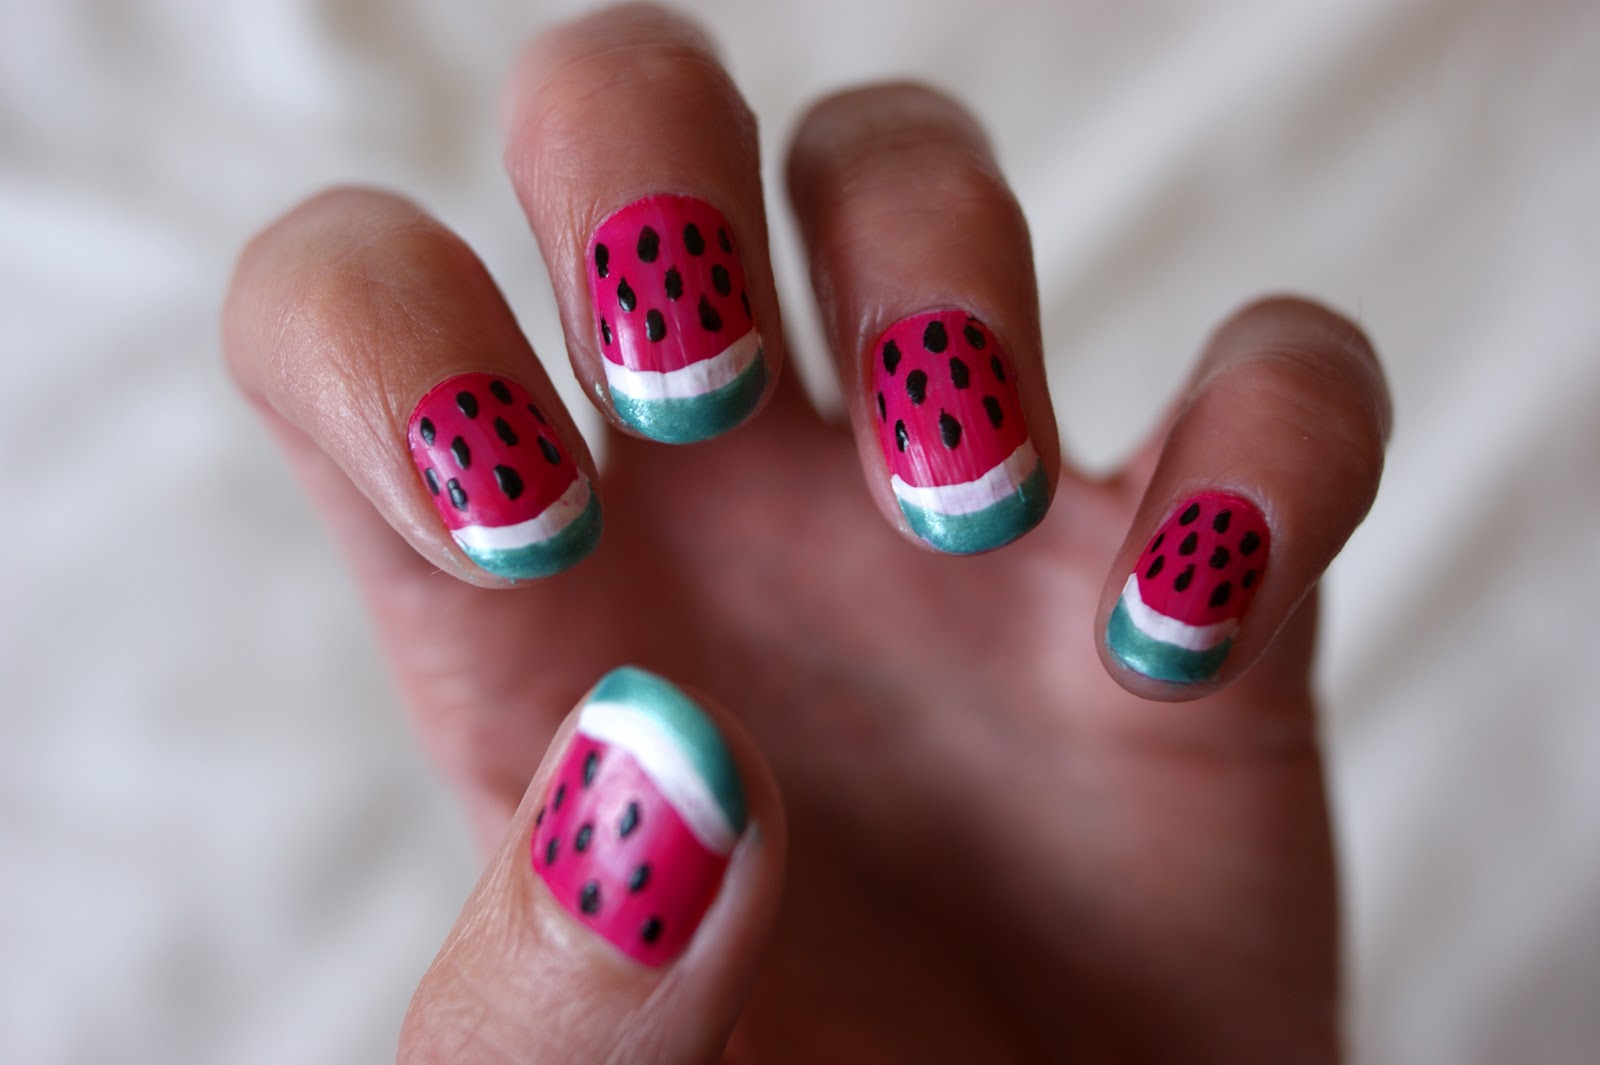 7. Cool Nail Art for Girls - wide 3